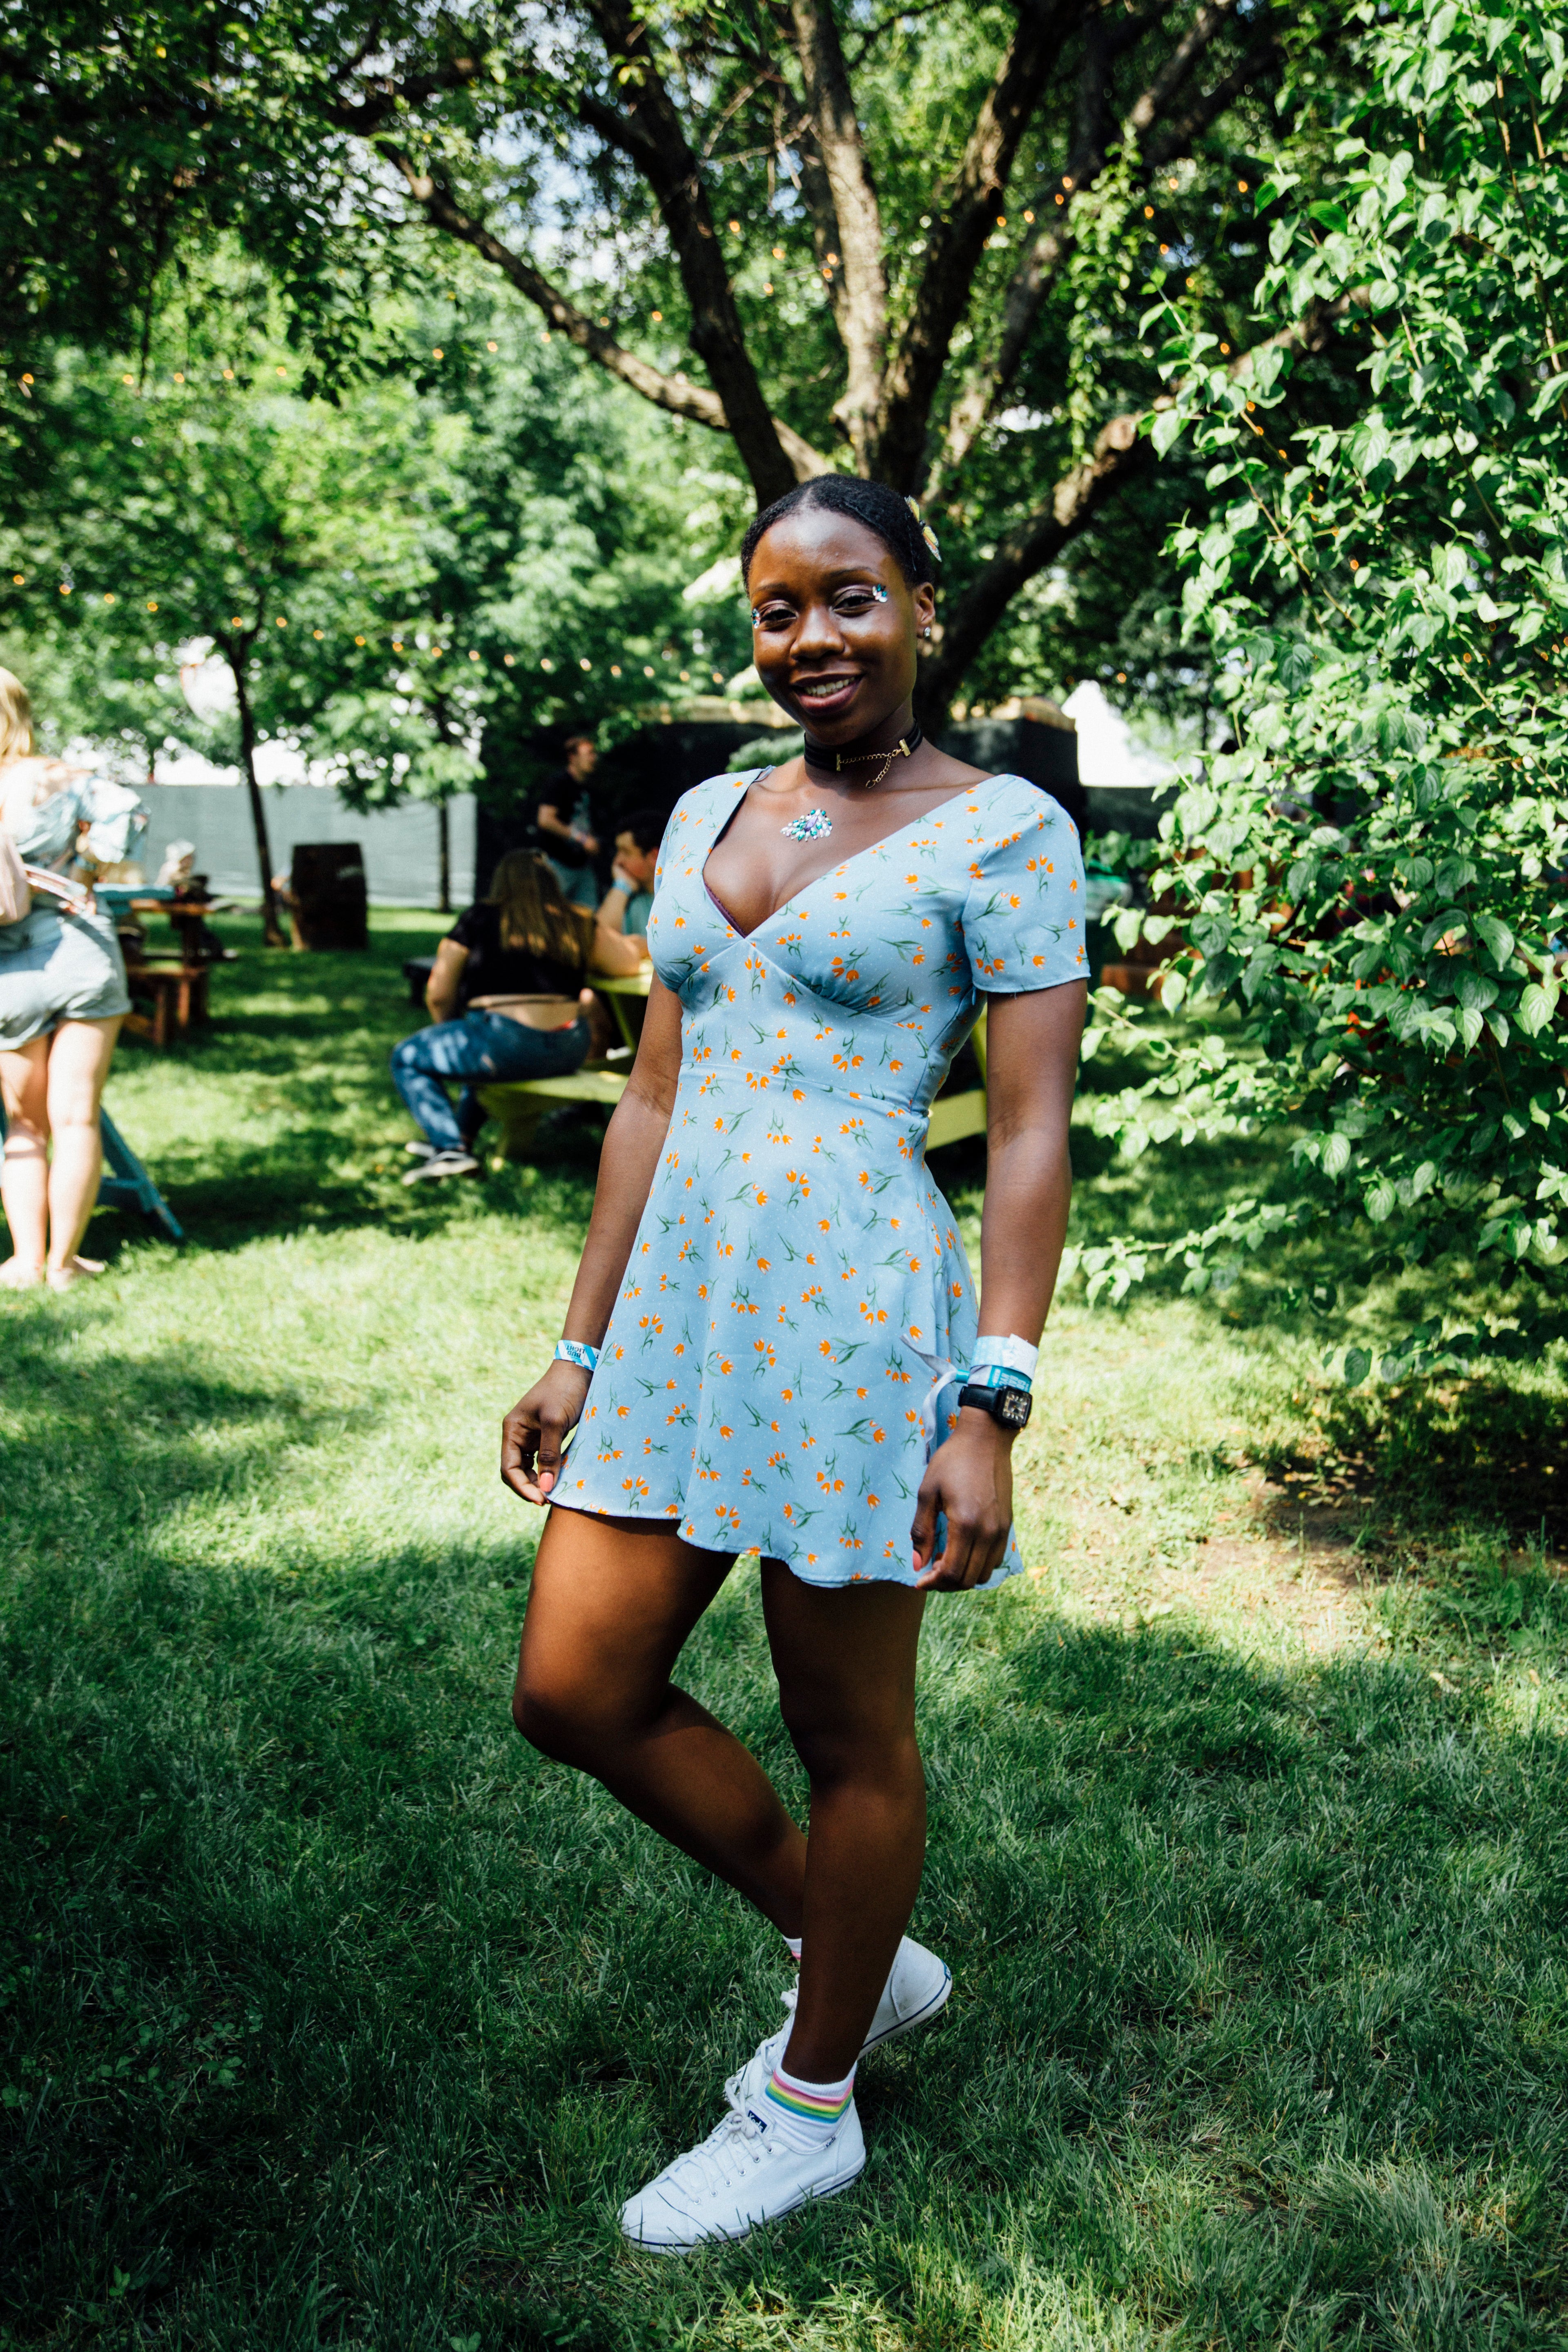 The Best Street Style Moments from the 2019 Governors Ball Music Festival